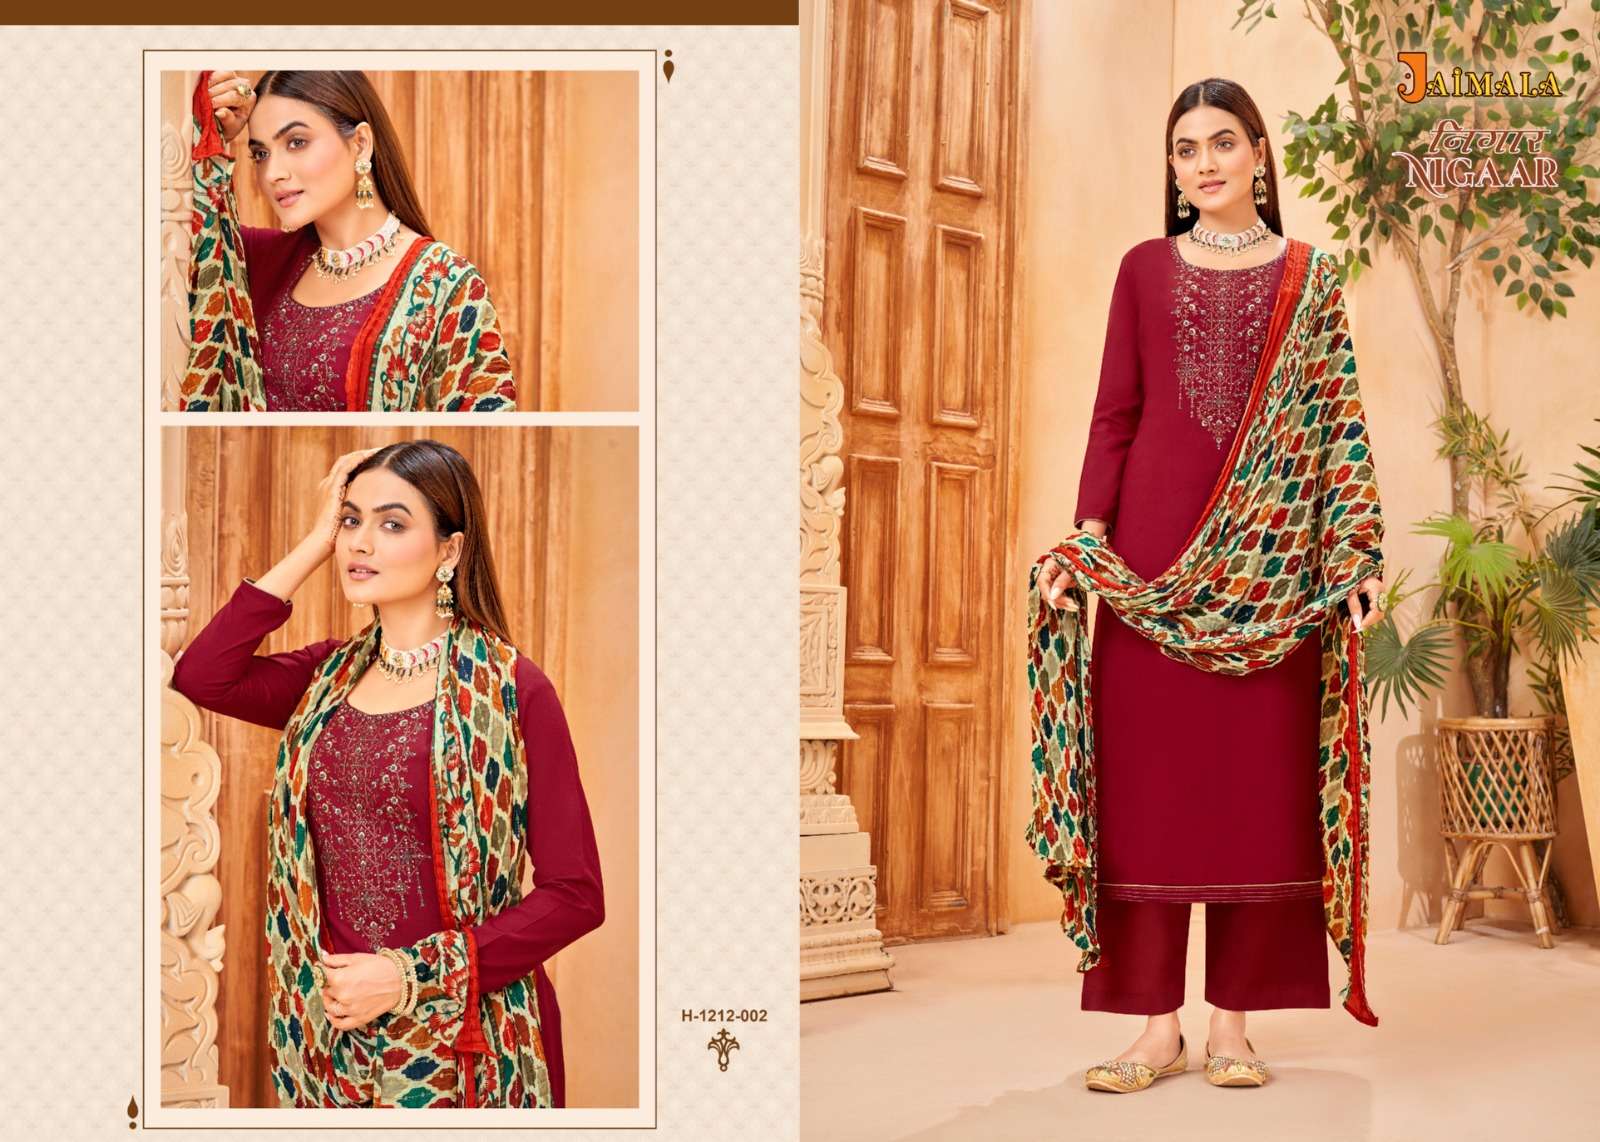 Nigaar 1212 By Jaimala 1212-001 To 1212-008 Series Beautiful Stylish Suits Fancy Colorful Casual Wear & Ethnic Wear & Ready To Wear Pure Rayon Slub Print Dresses At Wholesale Price